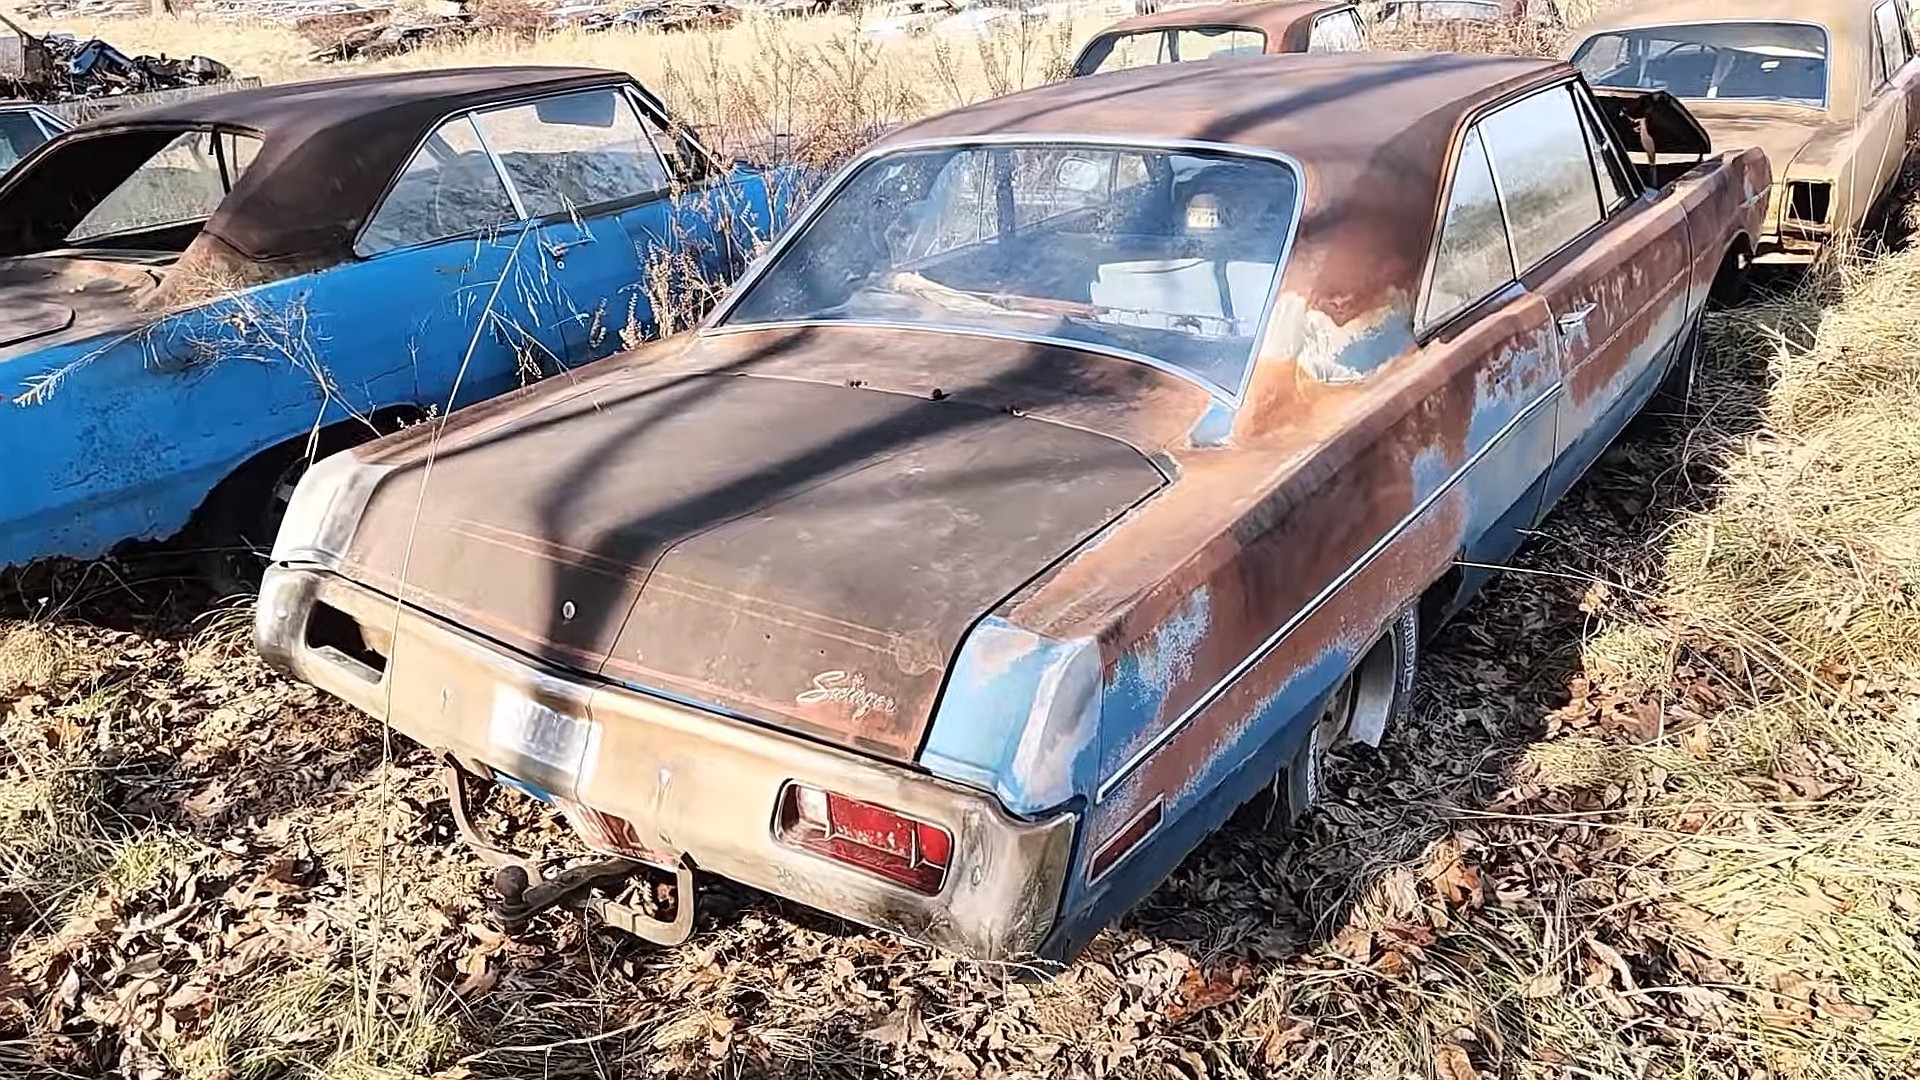 Worlds Rarest 1970 Dodge Dart Is a Super Swinger Automatic Rotting Away in a Backyard photo